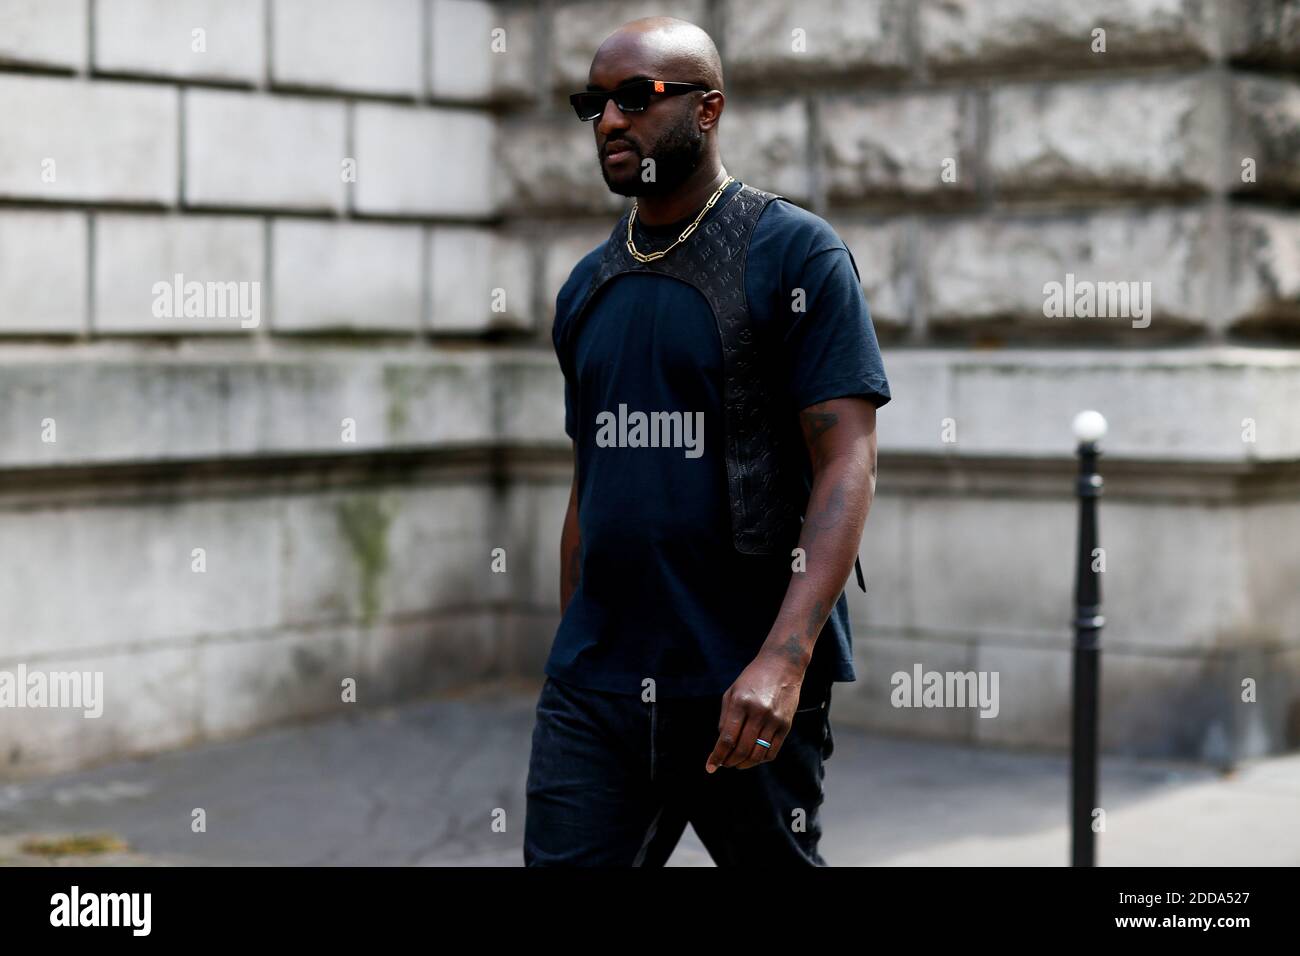 Street style, Virgil Abloh arriving at Dior Spring-Summer 2019 menswear  show held at Garde Republicaine, in Paris, France, on June 23rd, 2018.  Photo by Marie-Paola Bertrand-Hillion/ABACAPRESS.COM Stock Photo - Alamy